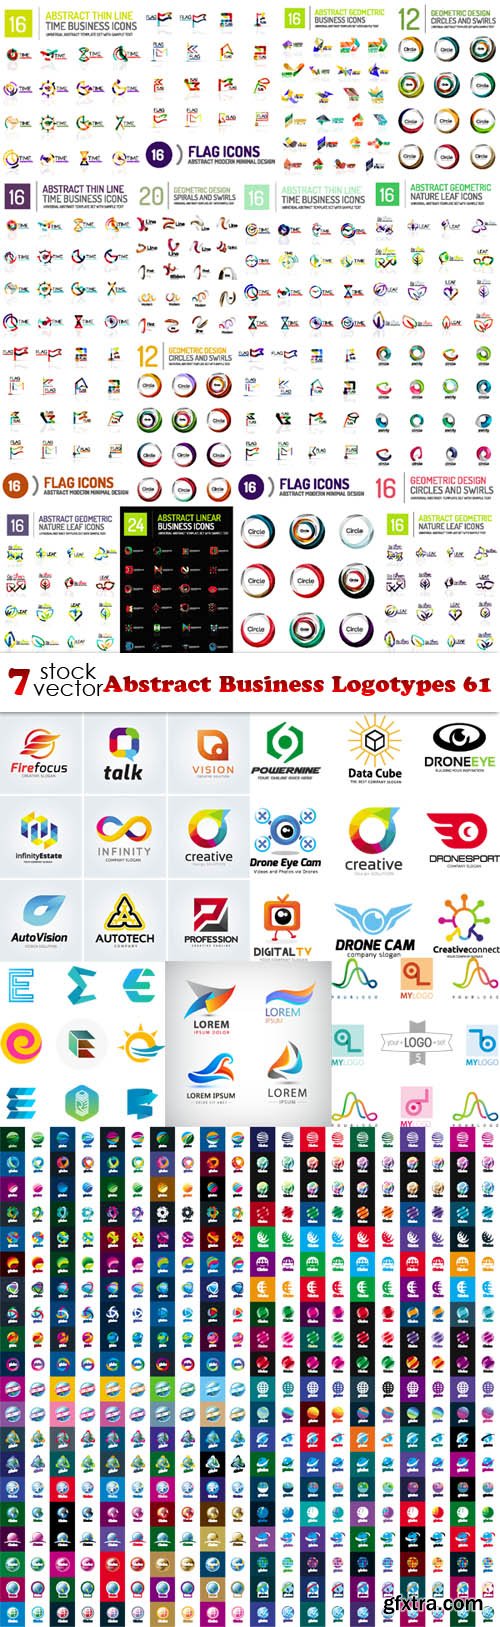 Vectors - Abstract Business Logotypes 61